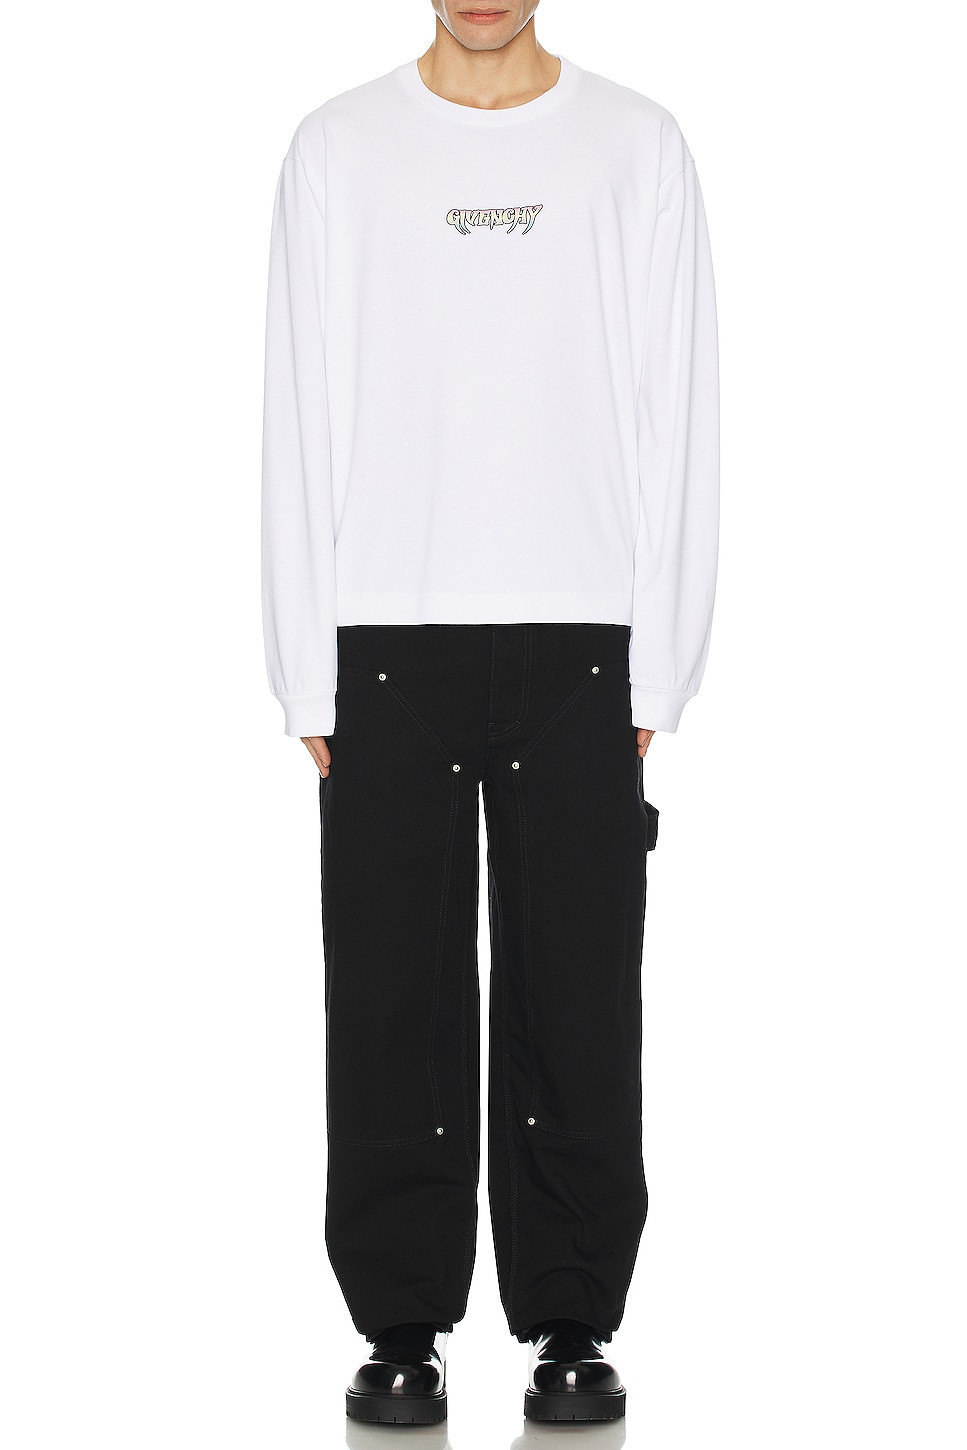 Givenchy Boxy Fit Long Sleeves Tee in White